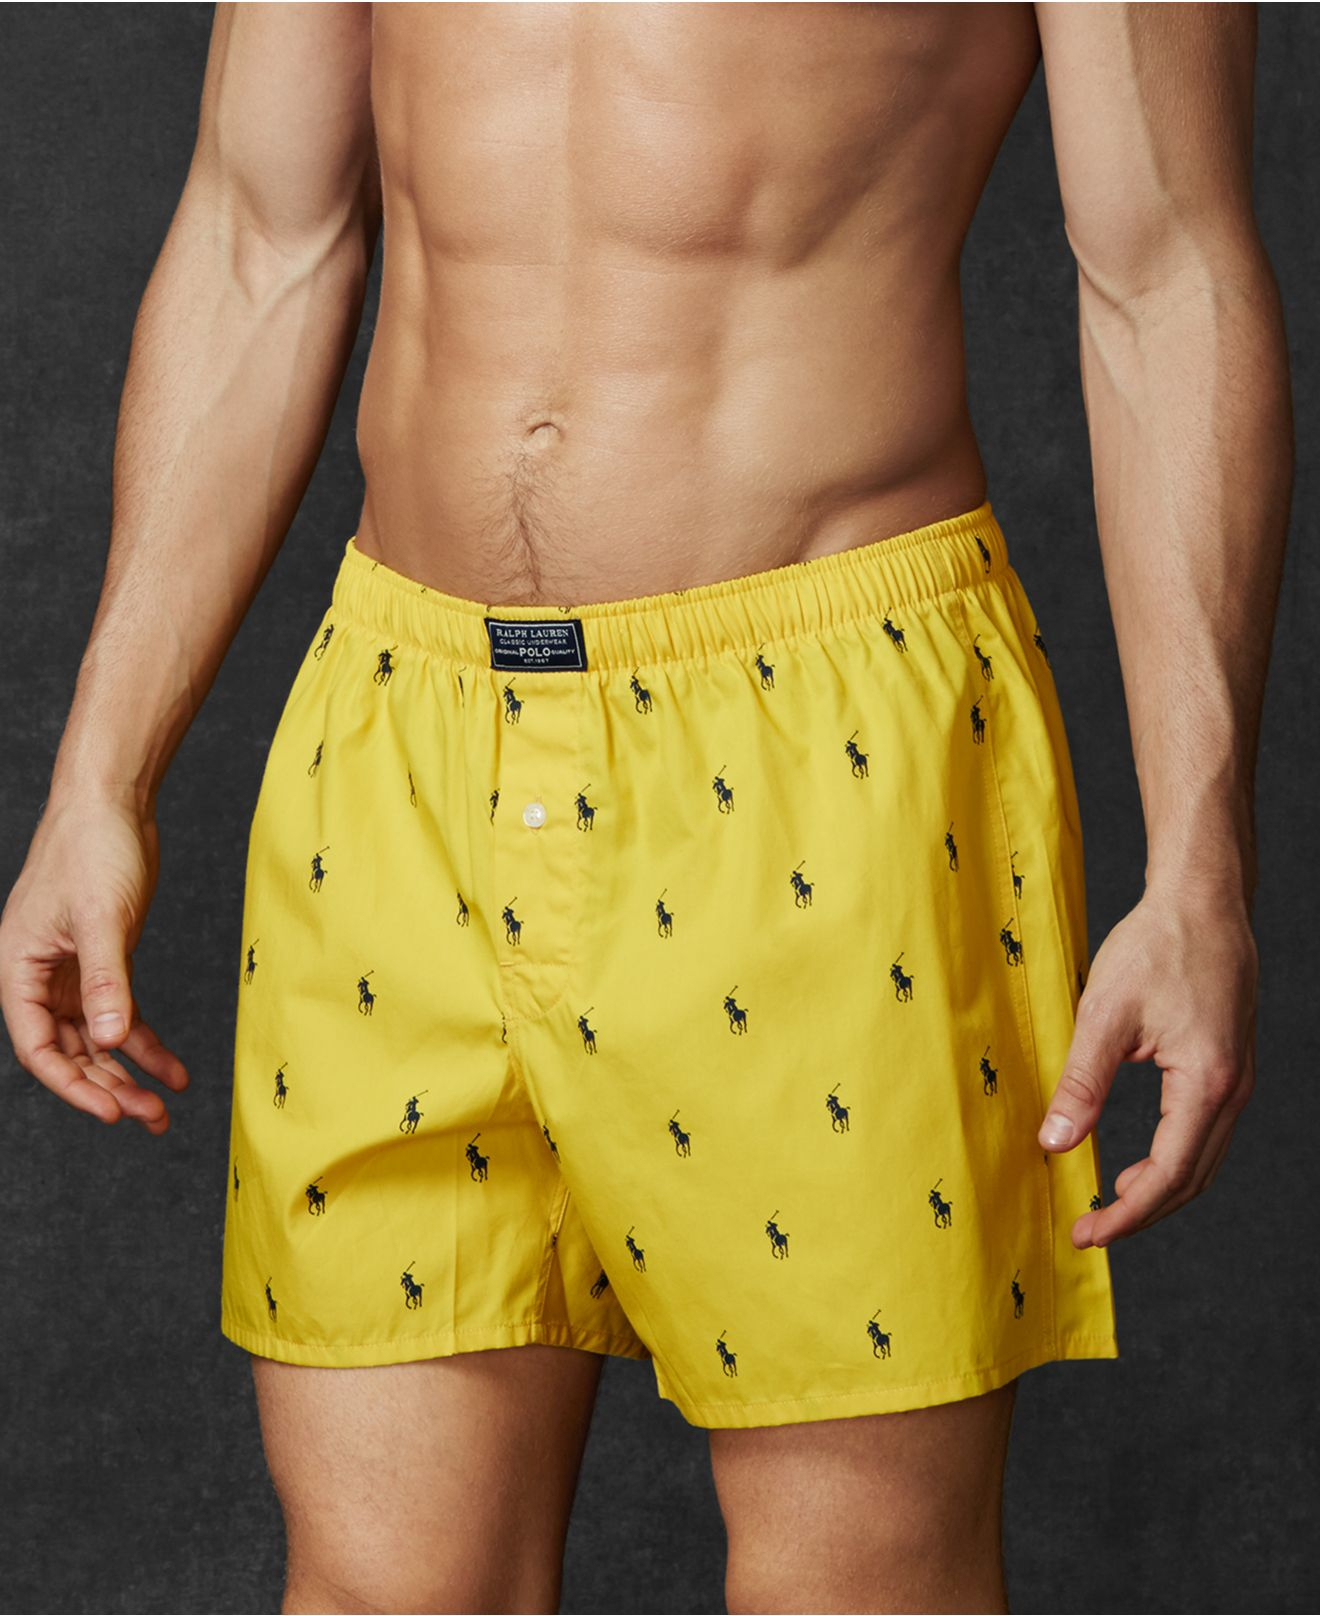 Lyst - Polo Ralph Lauren Allover Pony Player Boxers in Yellow for Men